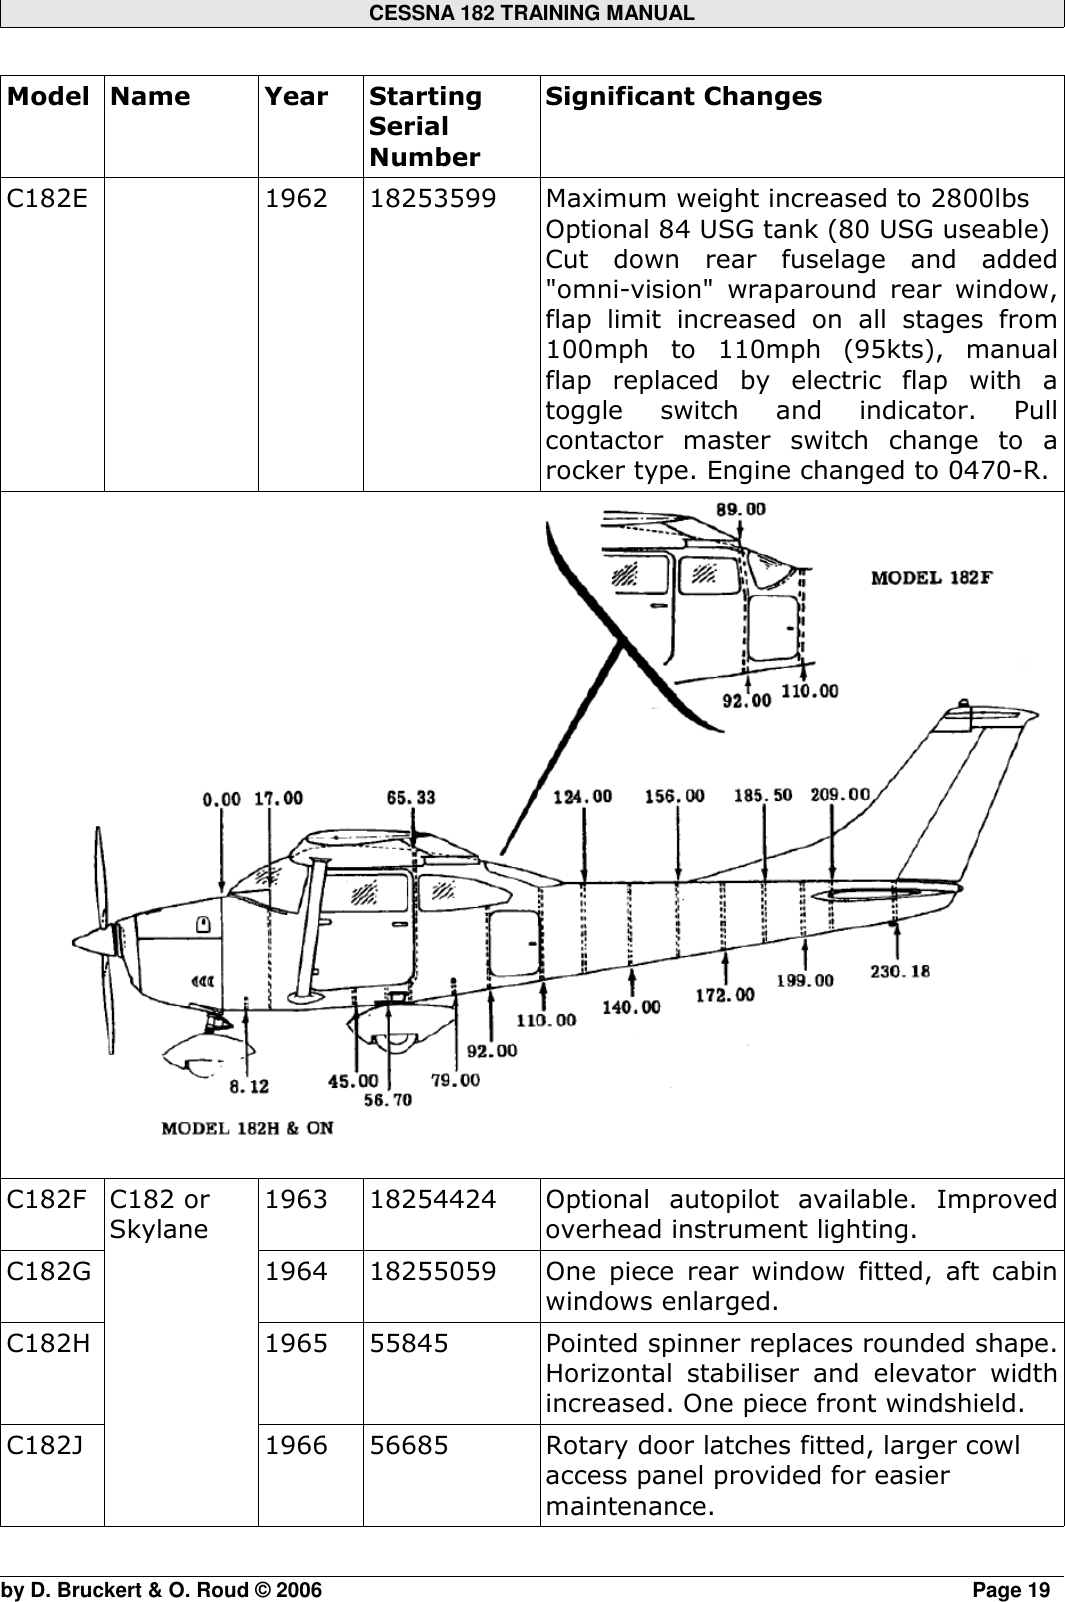 Page 6 of 12 - C182 Training Manual 1Jul2011 - Technical Cessna_C182--History_RSV-Training-Manuals_2011 Cessna C182--History RSV-Training-Manuals 2011